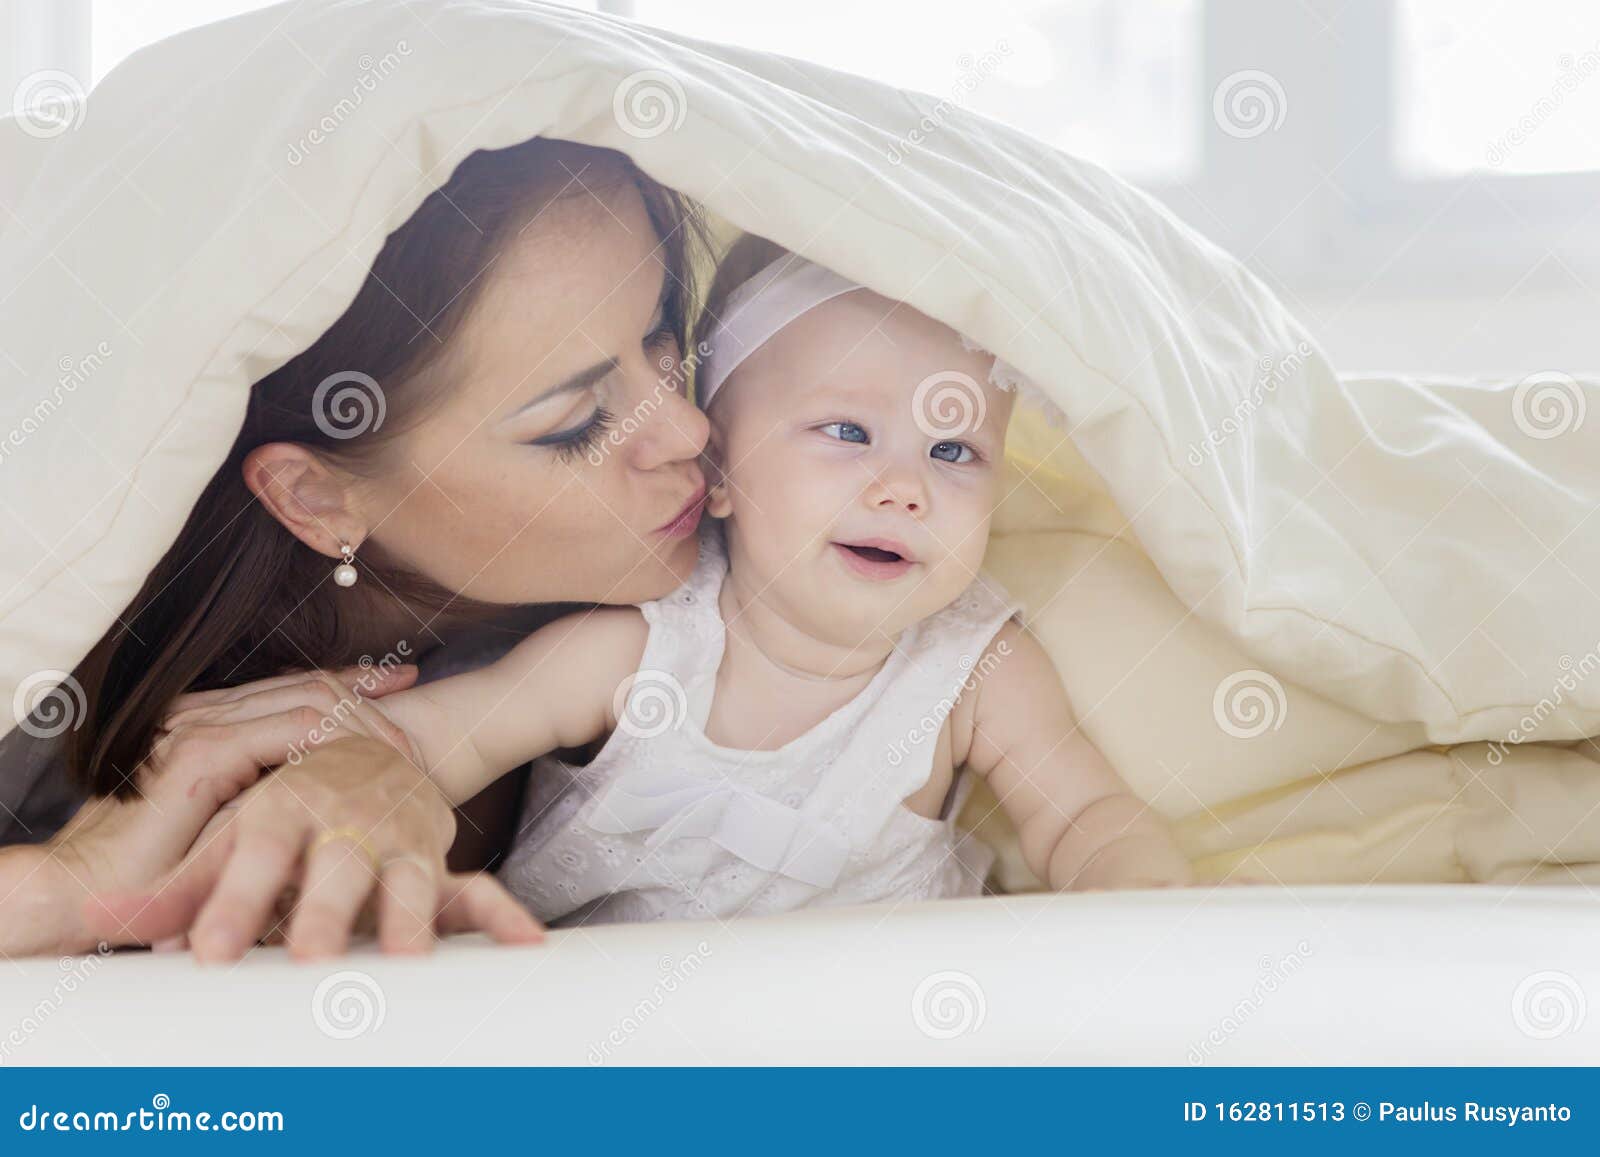 Mother Kissing Her Baby Under a Blanket Stock Image - Image of ...